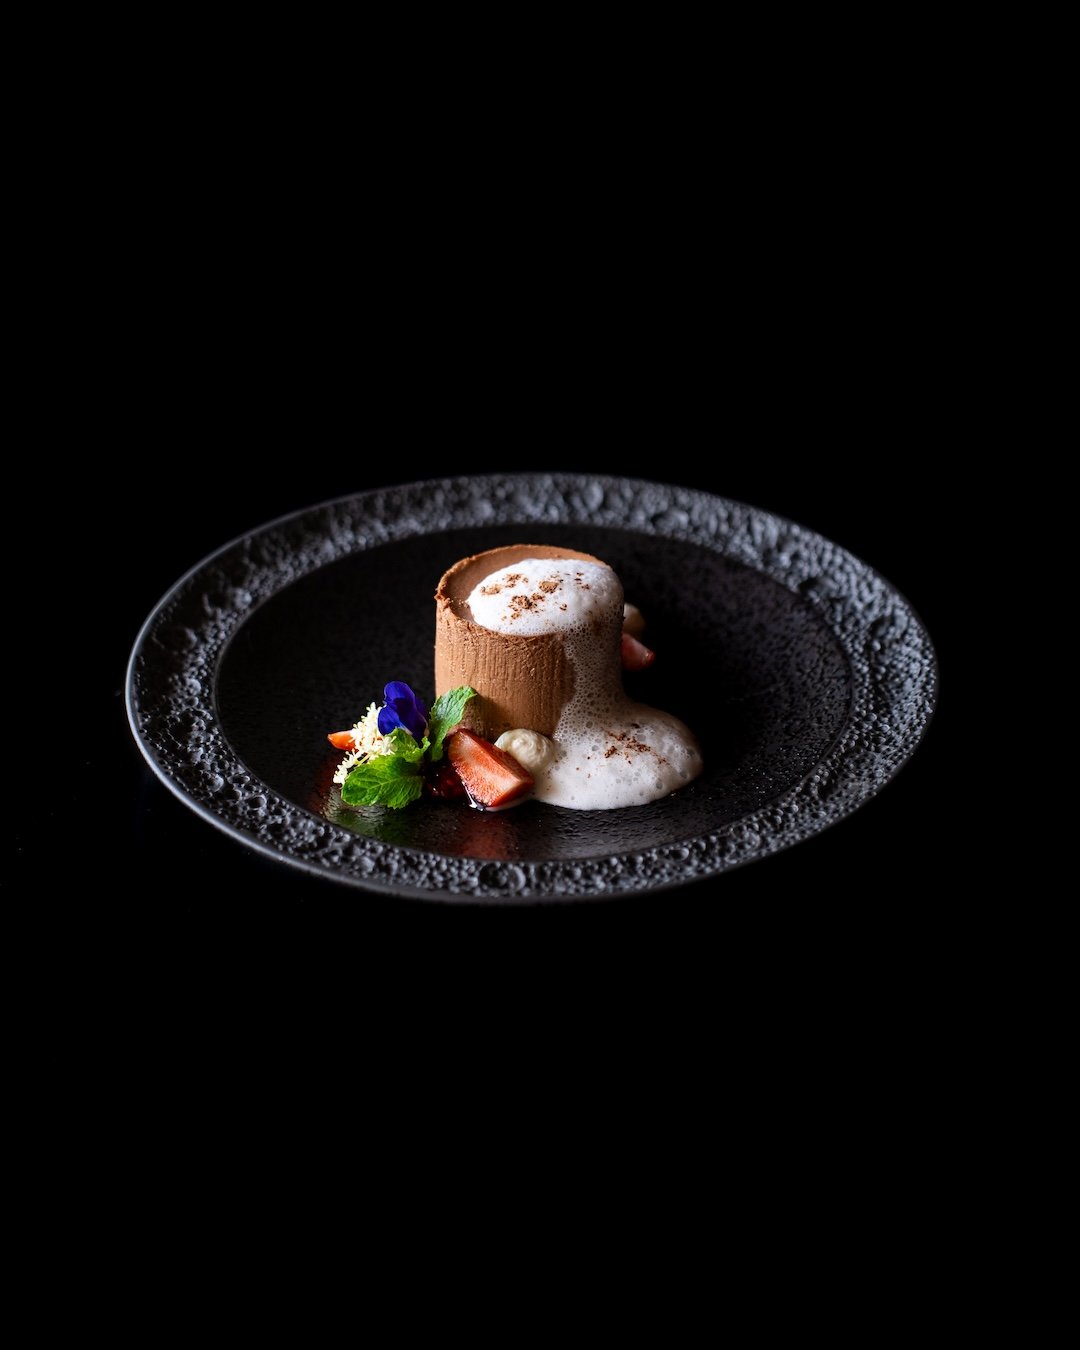 Treat yourself to a taste of luxury with our Chocolate Mousse! Delight in rich chocolate paired with vibrant raspberry gel, delicate white chocolate foam, and a fudgy brownie. It's a symphony of flavors that will leave you craving more. 🍫😋

CHOCOLA